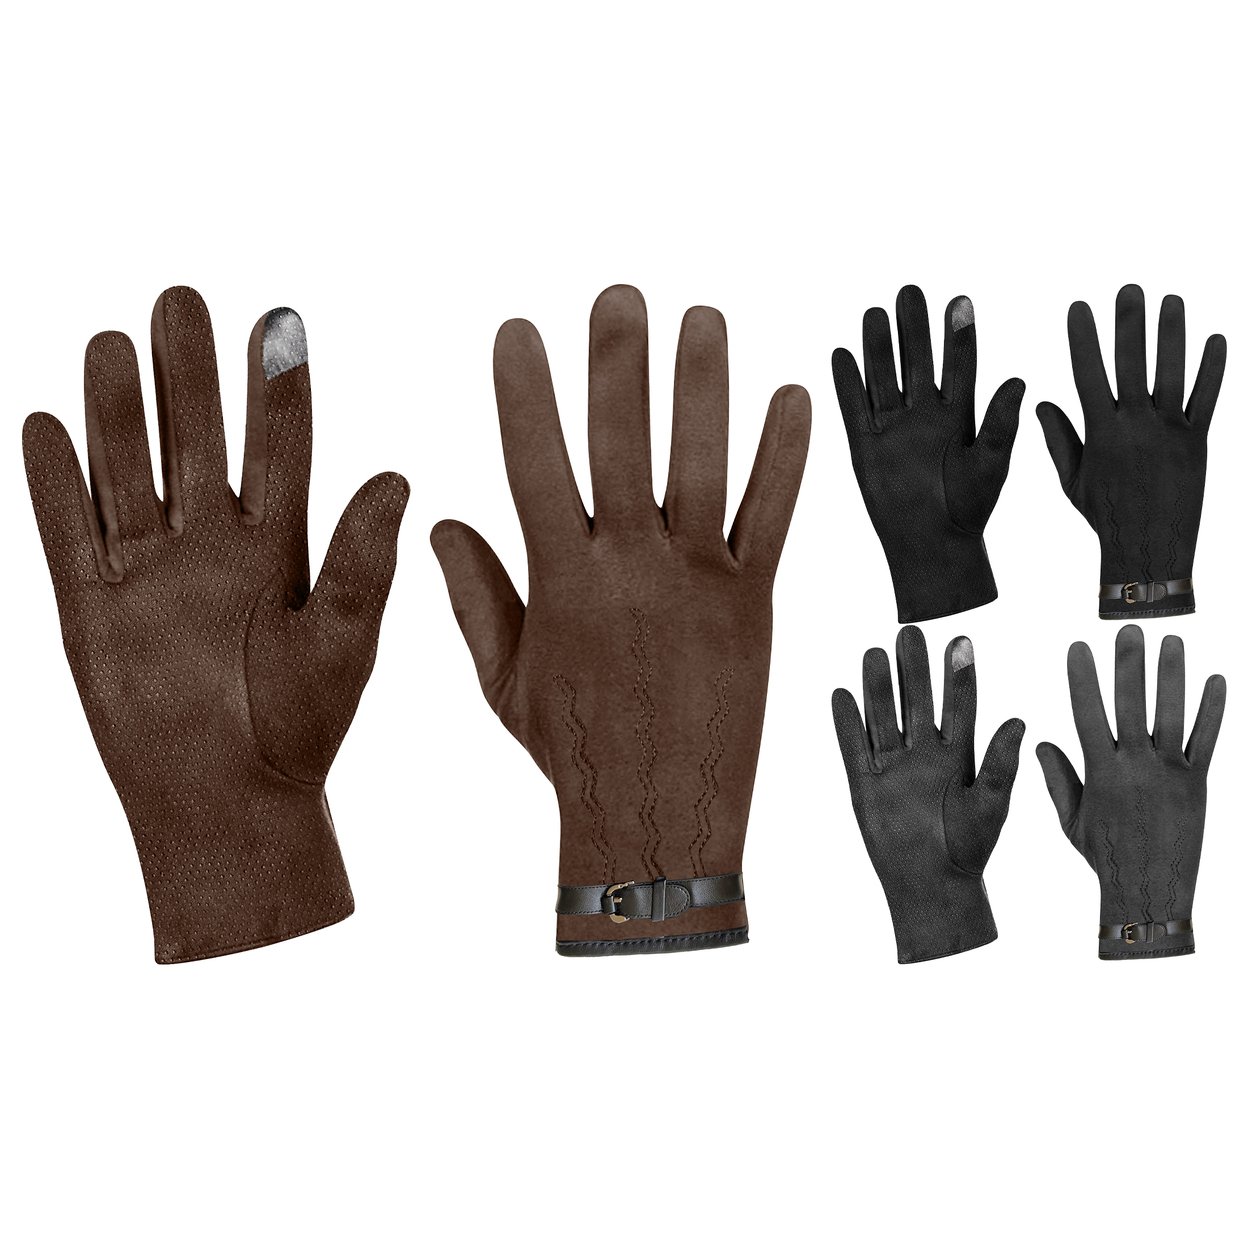 2-Pairs: Winter Warm Soft Lining Weather-Proof Touchscreen Suede Insulated Gloves - Black & Navy